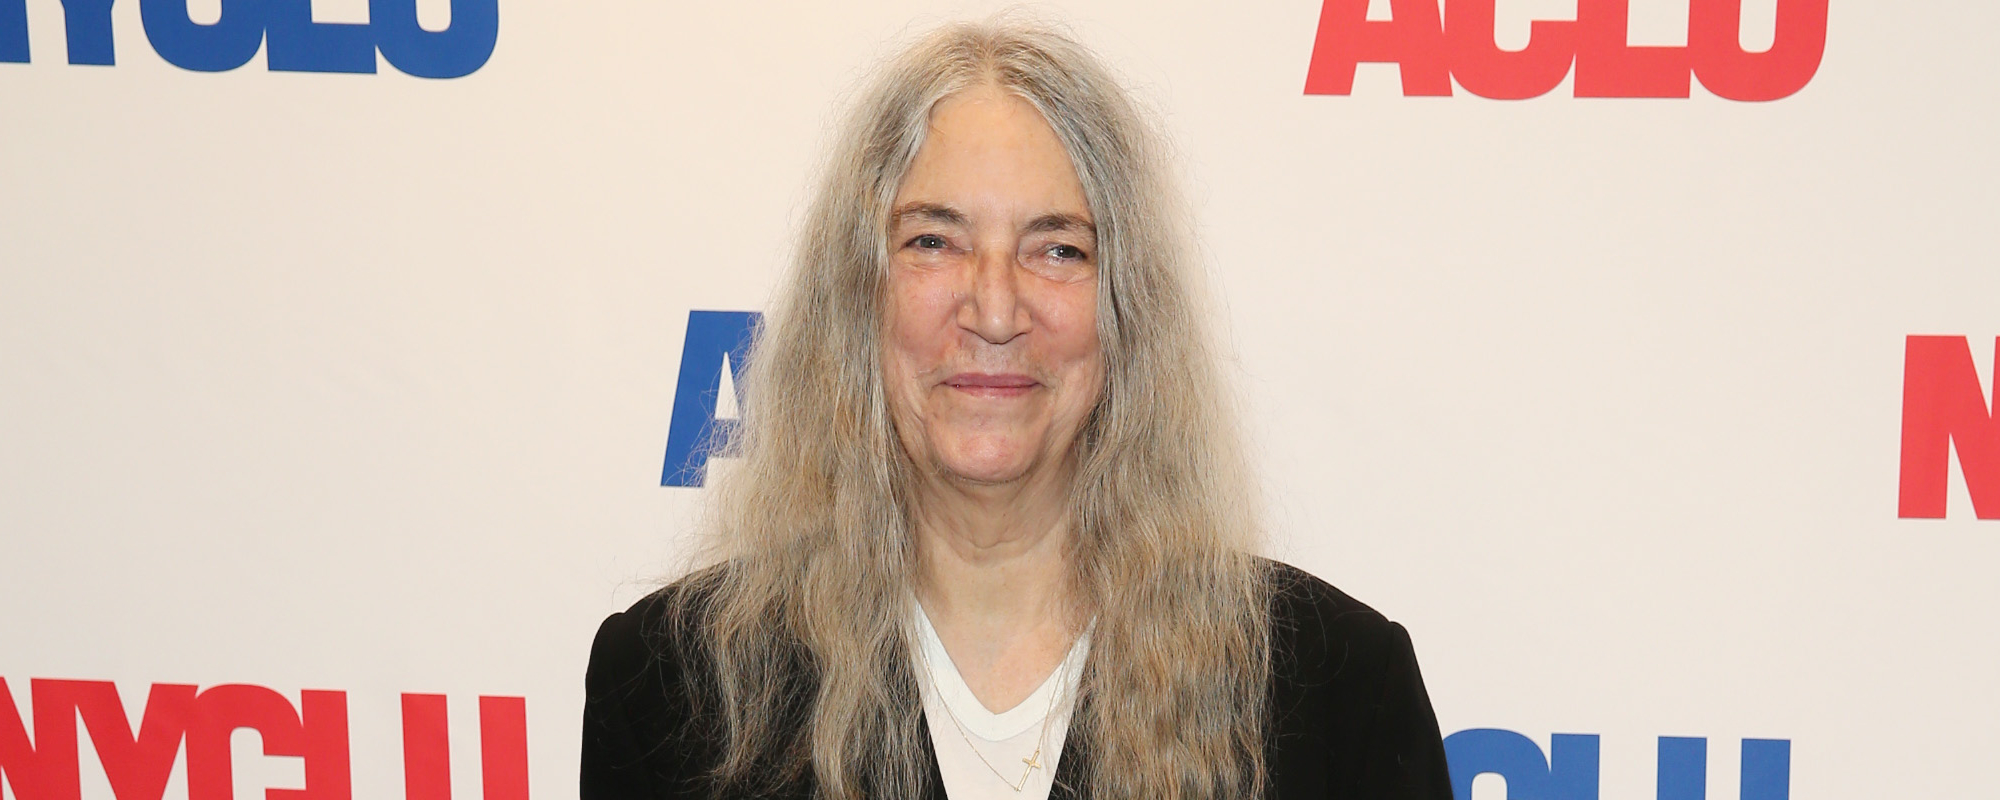 Patti Smith Responds to Taylor Swift After Being Name-Dropped on “The Tortured Poets Department”